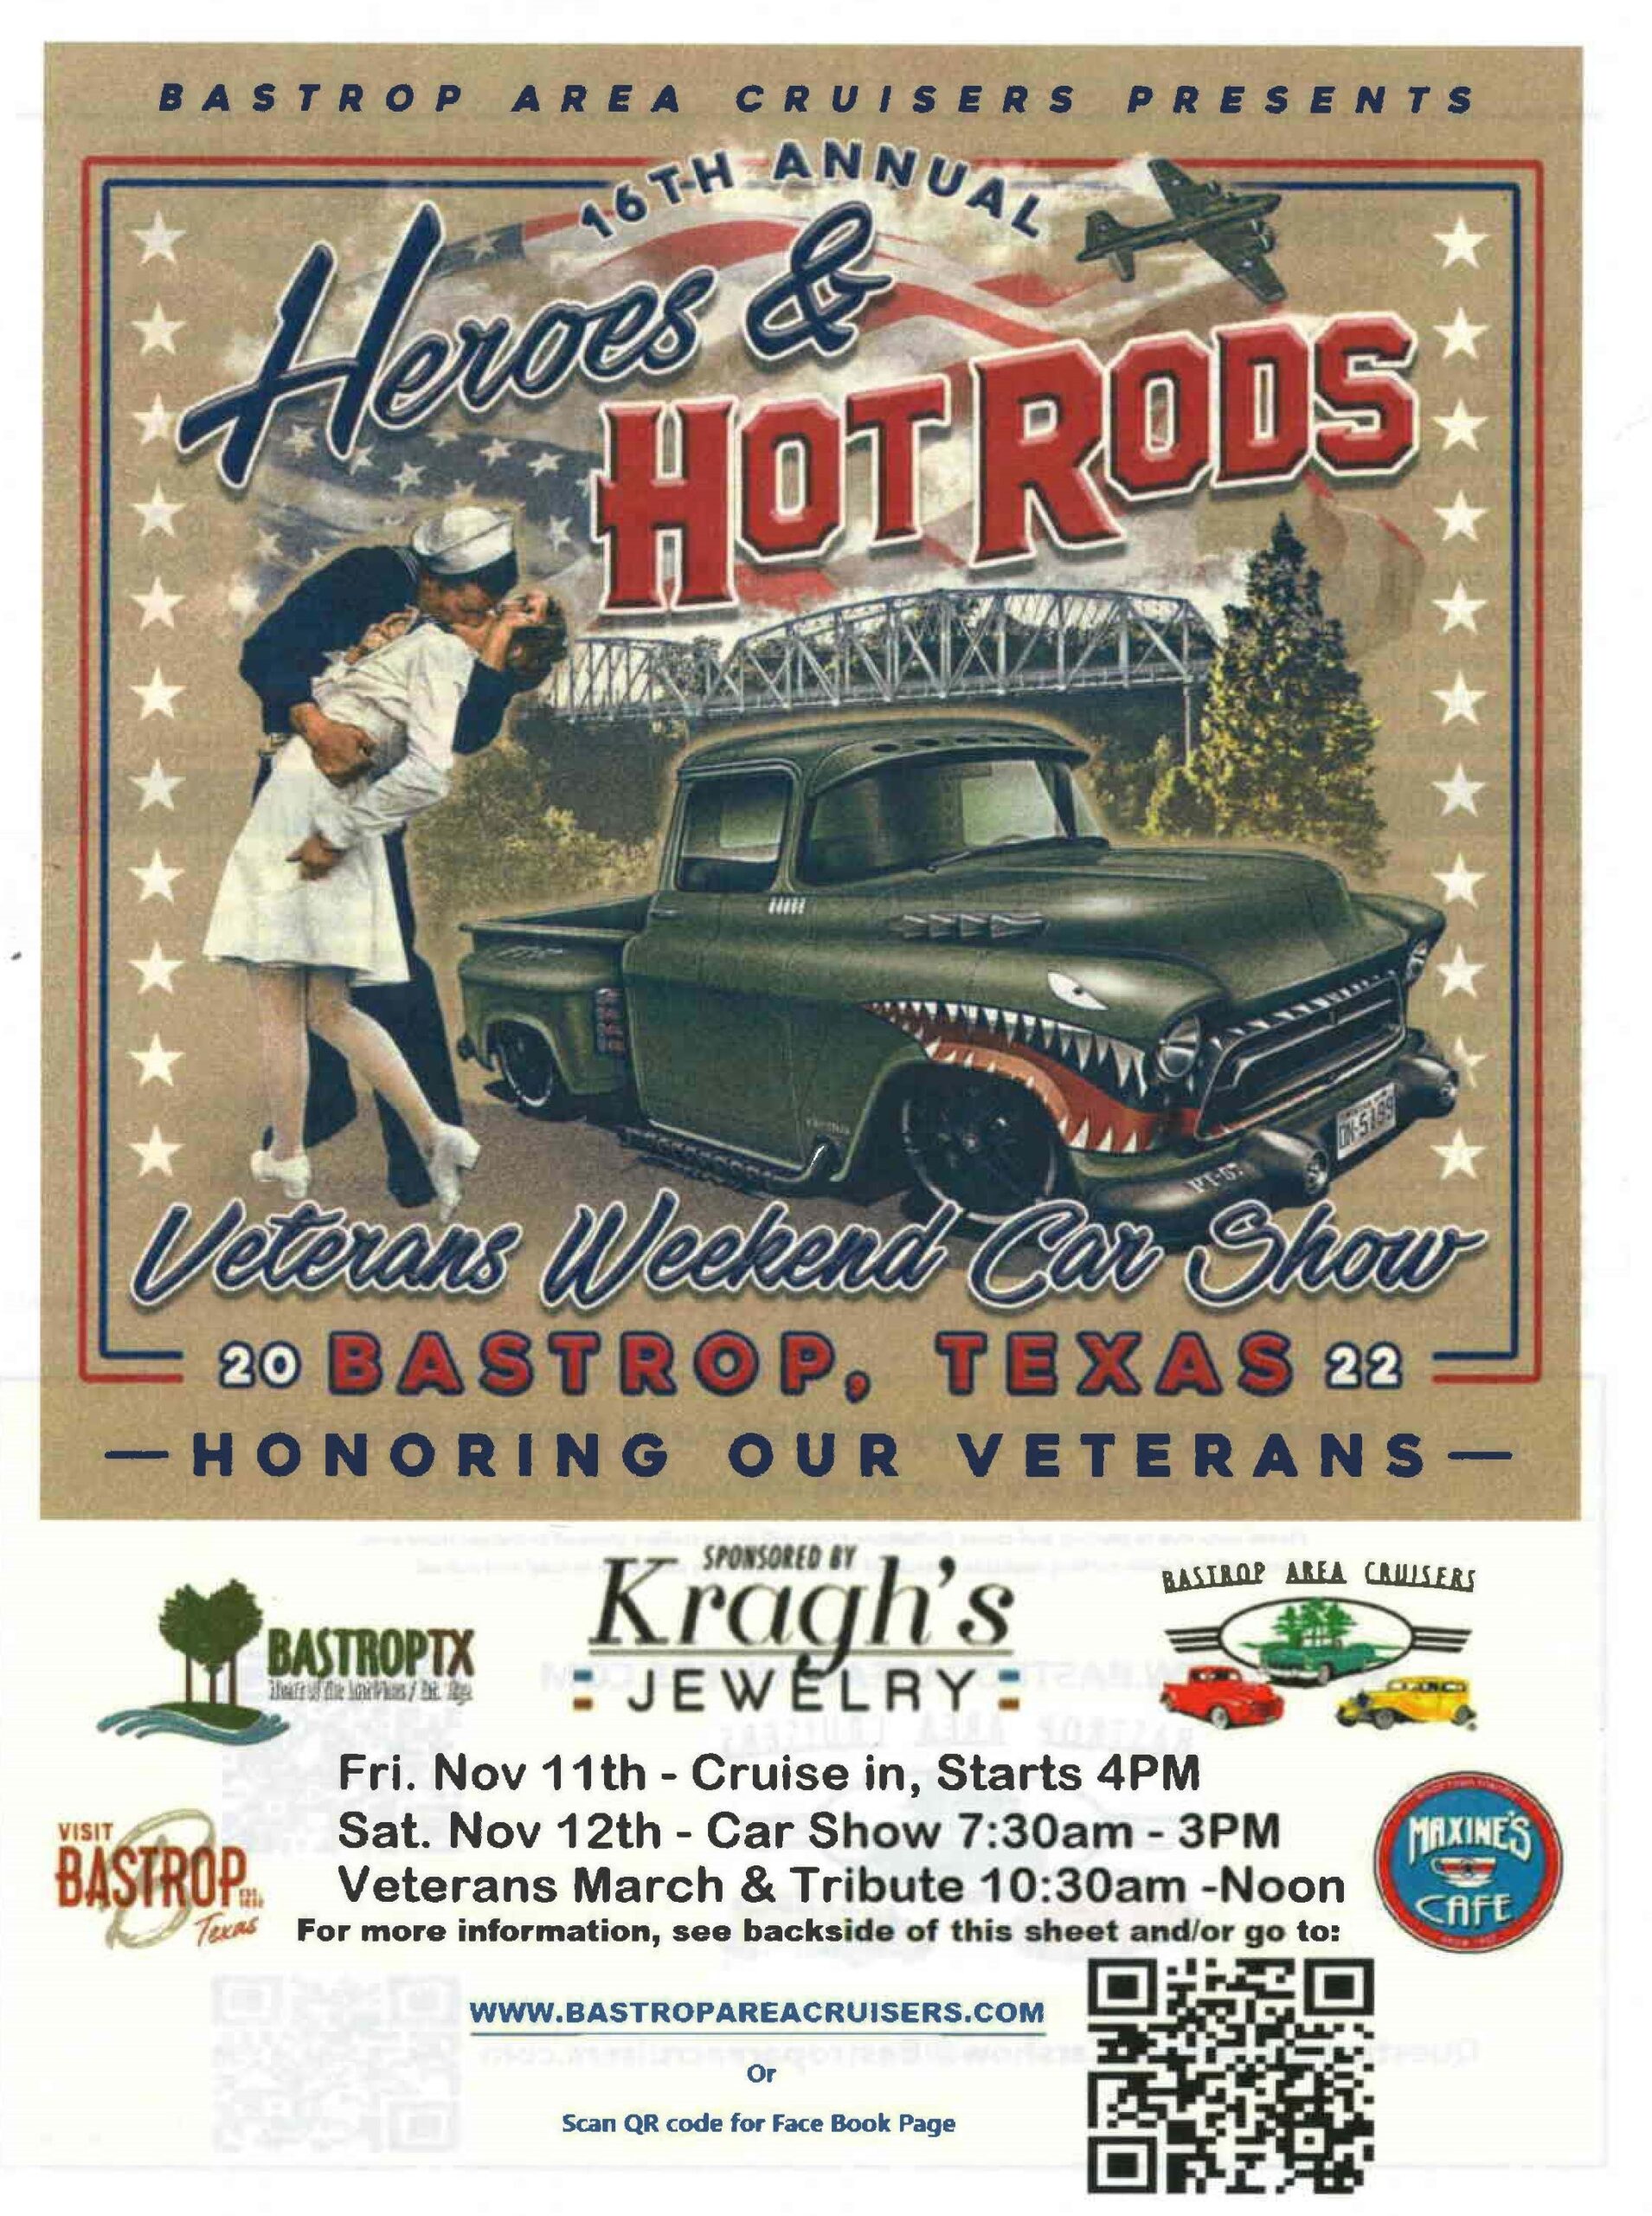 “Heroes & Hot Rods”THE BASTROP CAR SHOW Crosshairs Texas